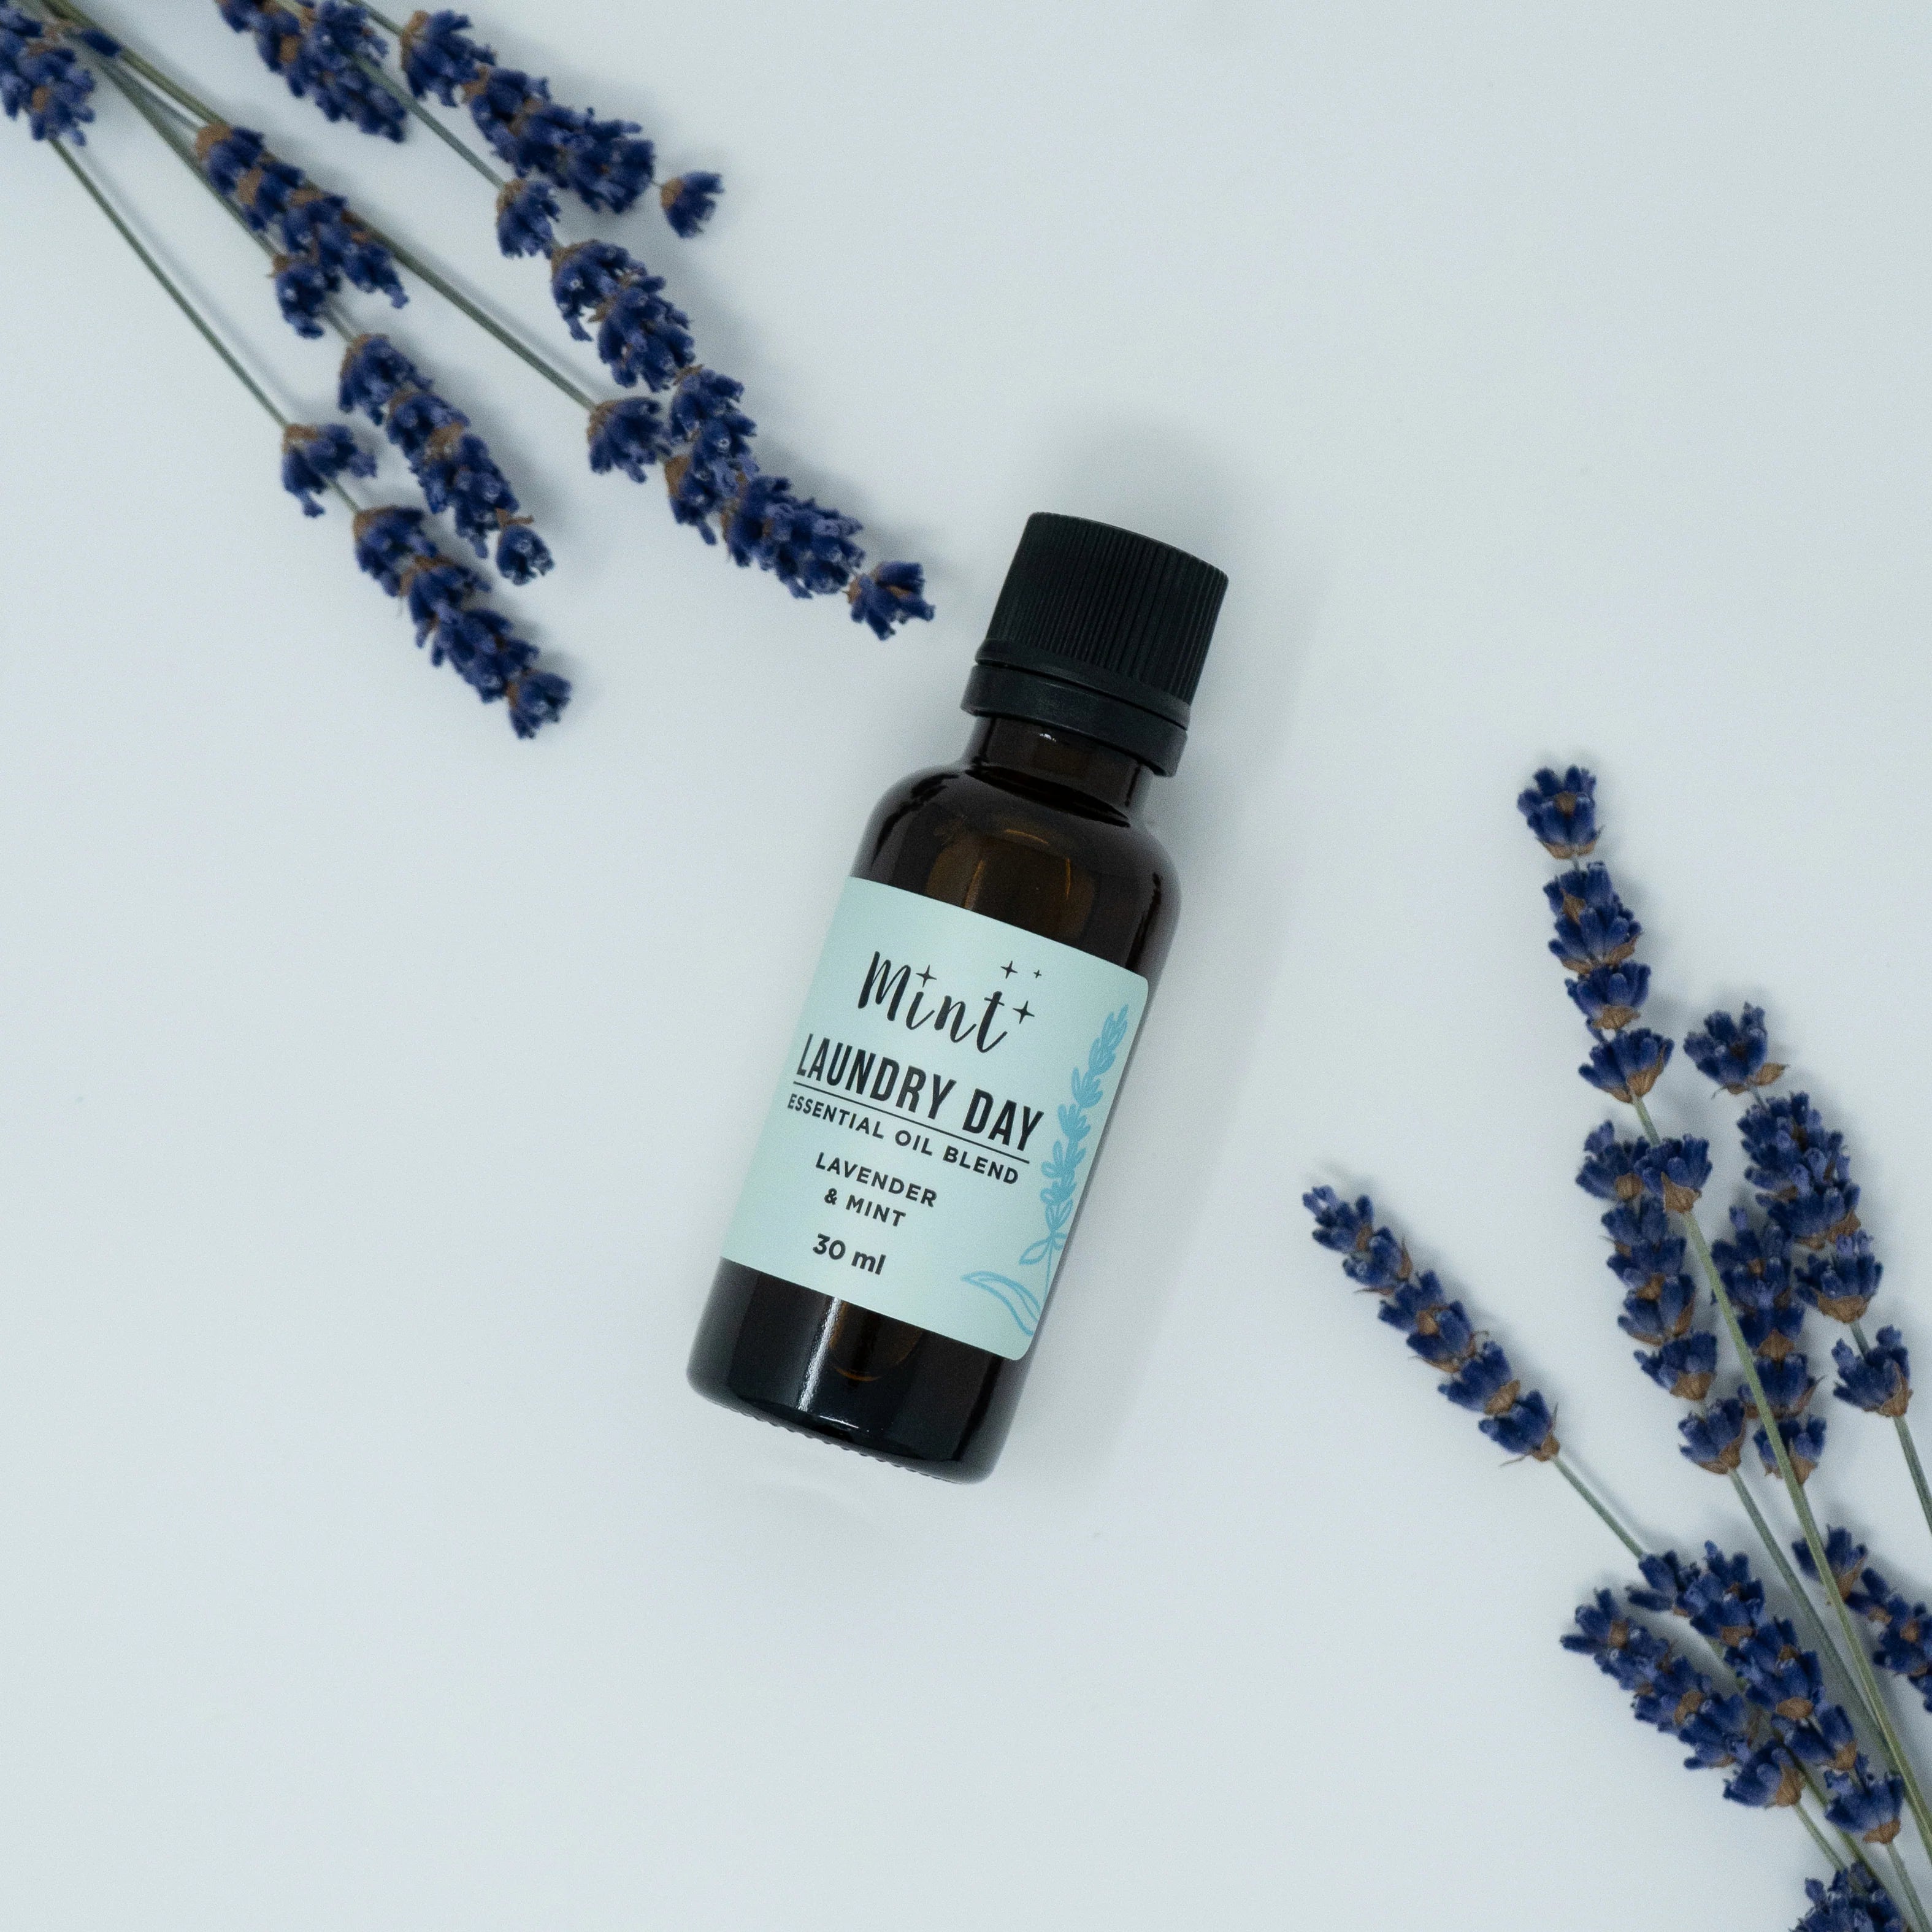 Laundry Day - Essential Oil Blend | Mint Cleaning